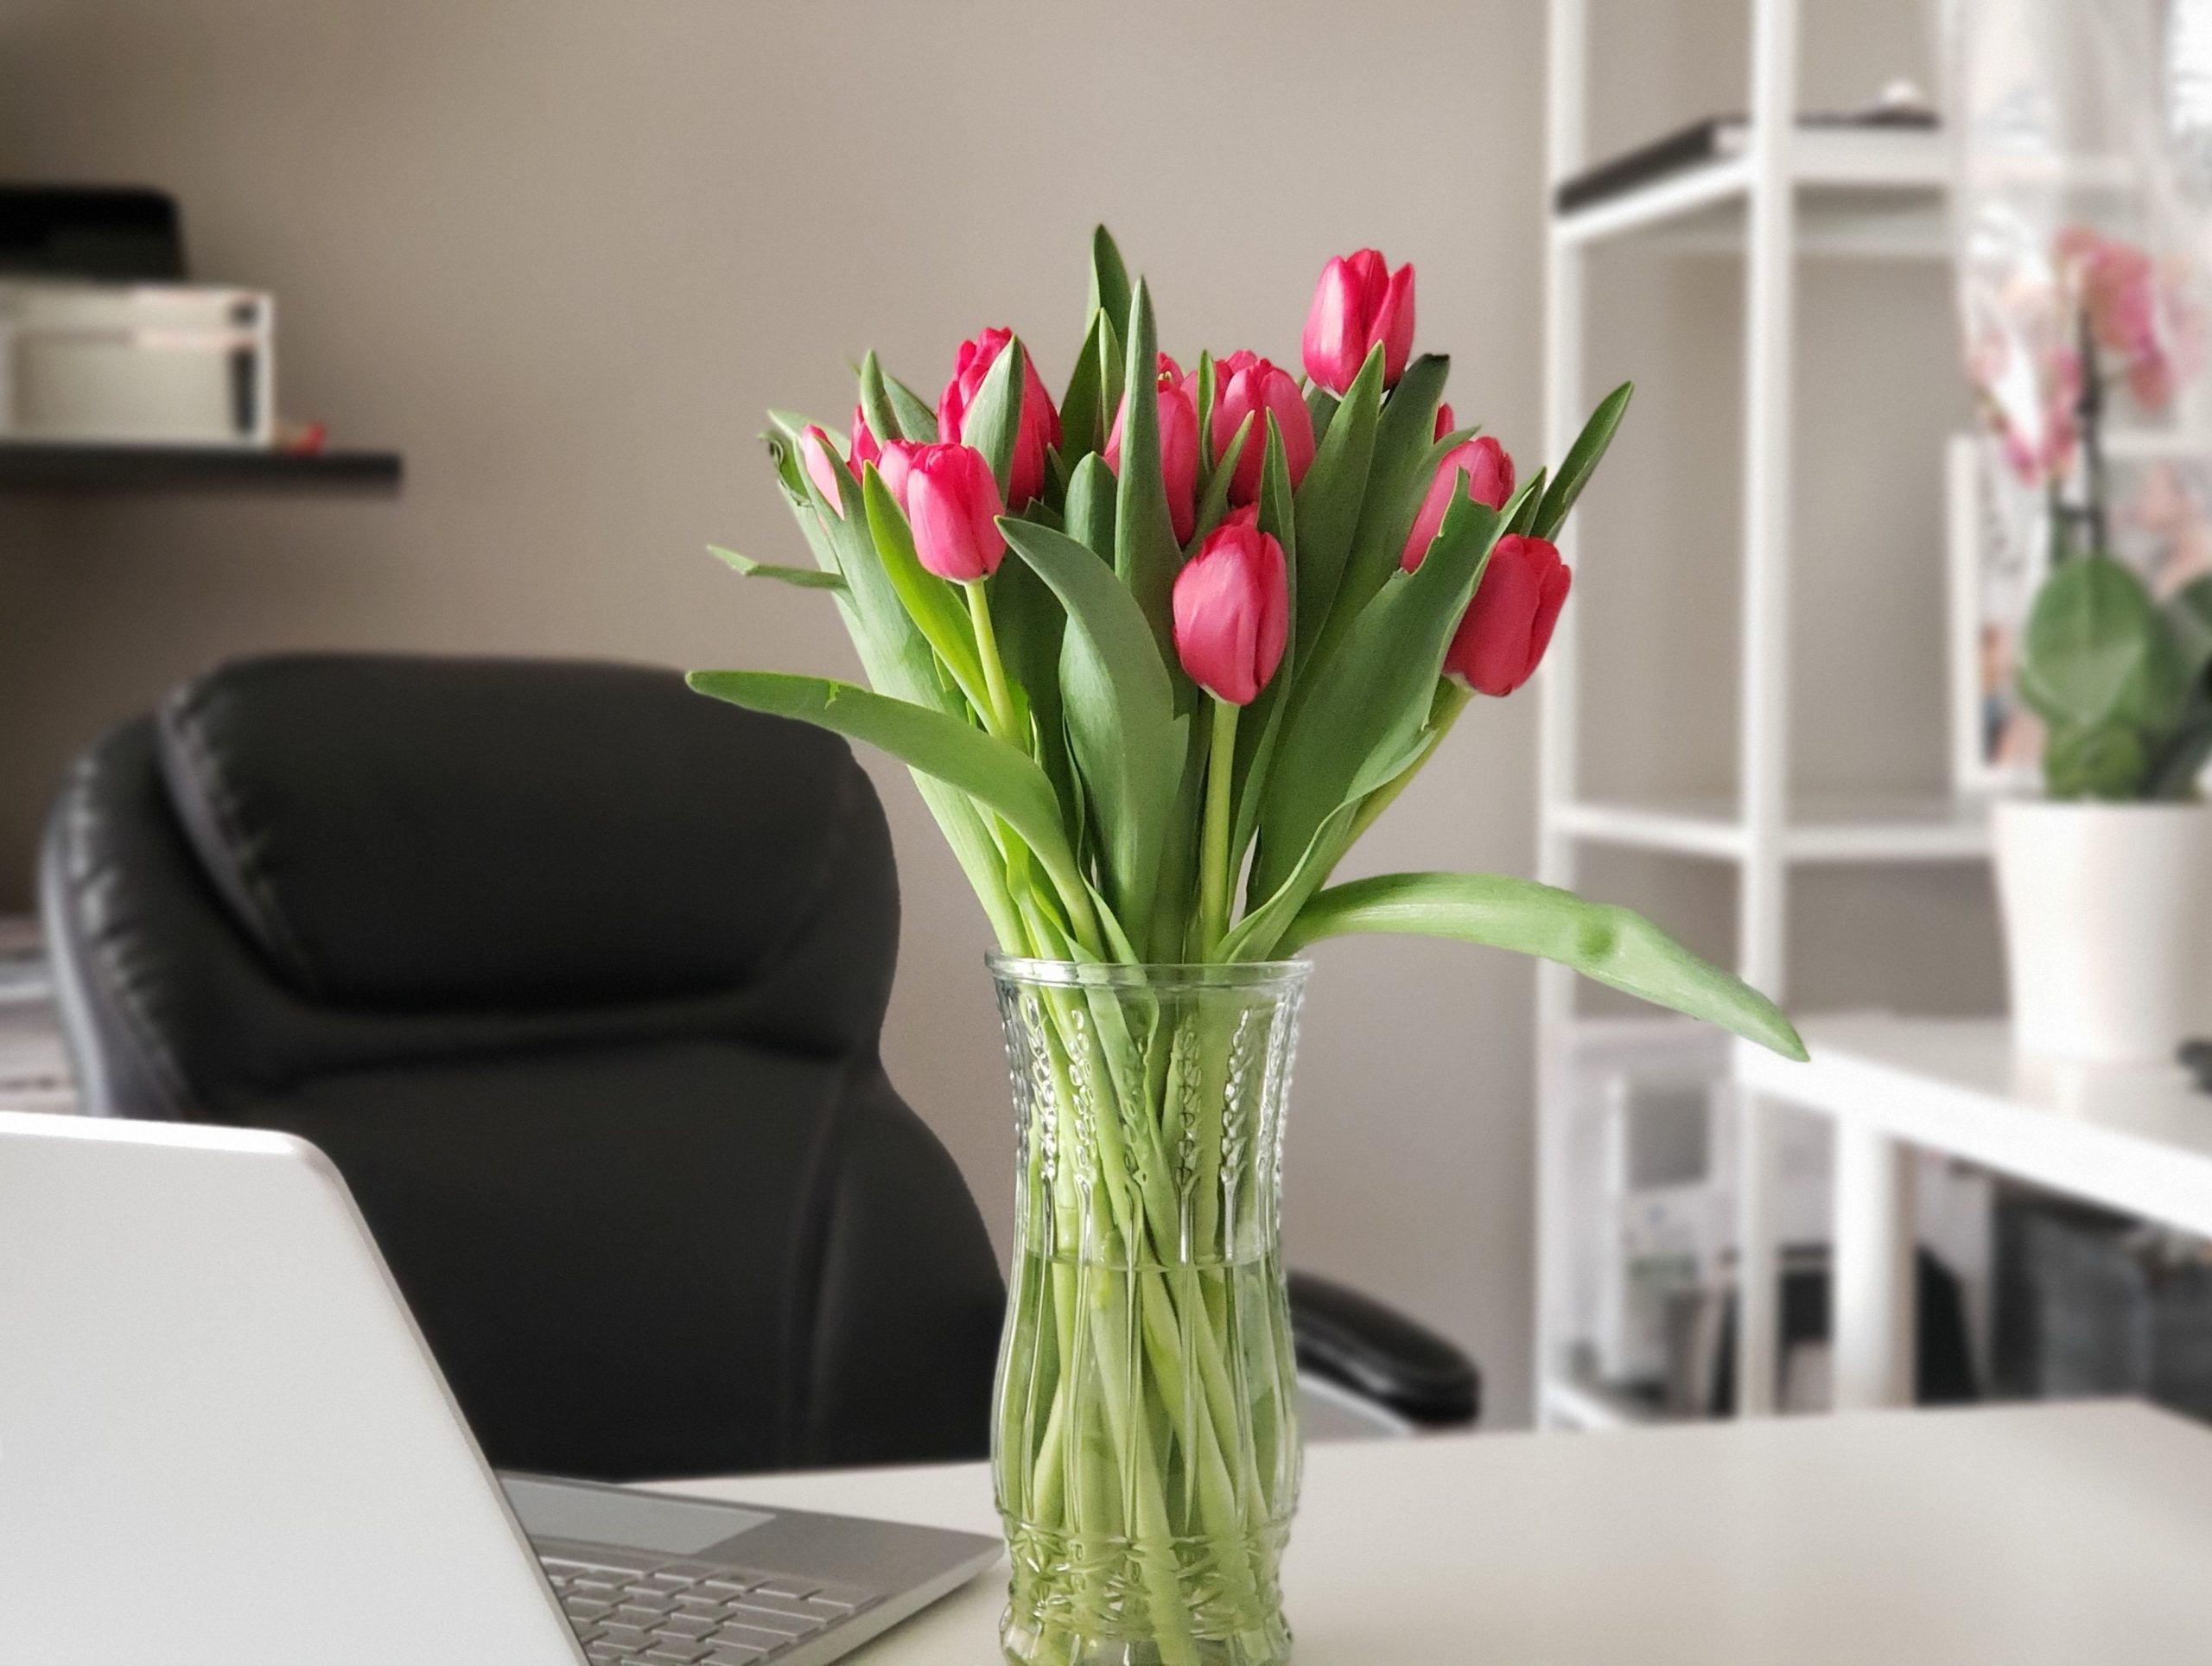 3 Ways to Get Your Office Ready for Spring